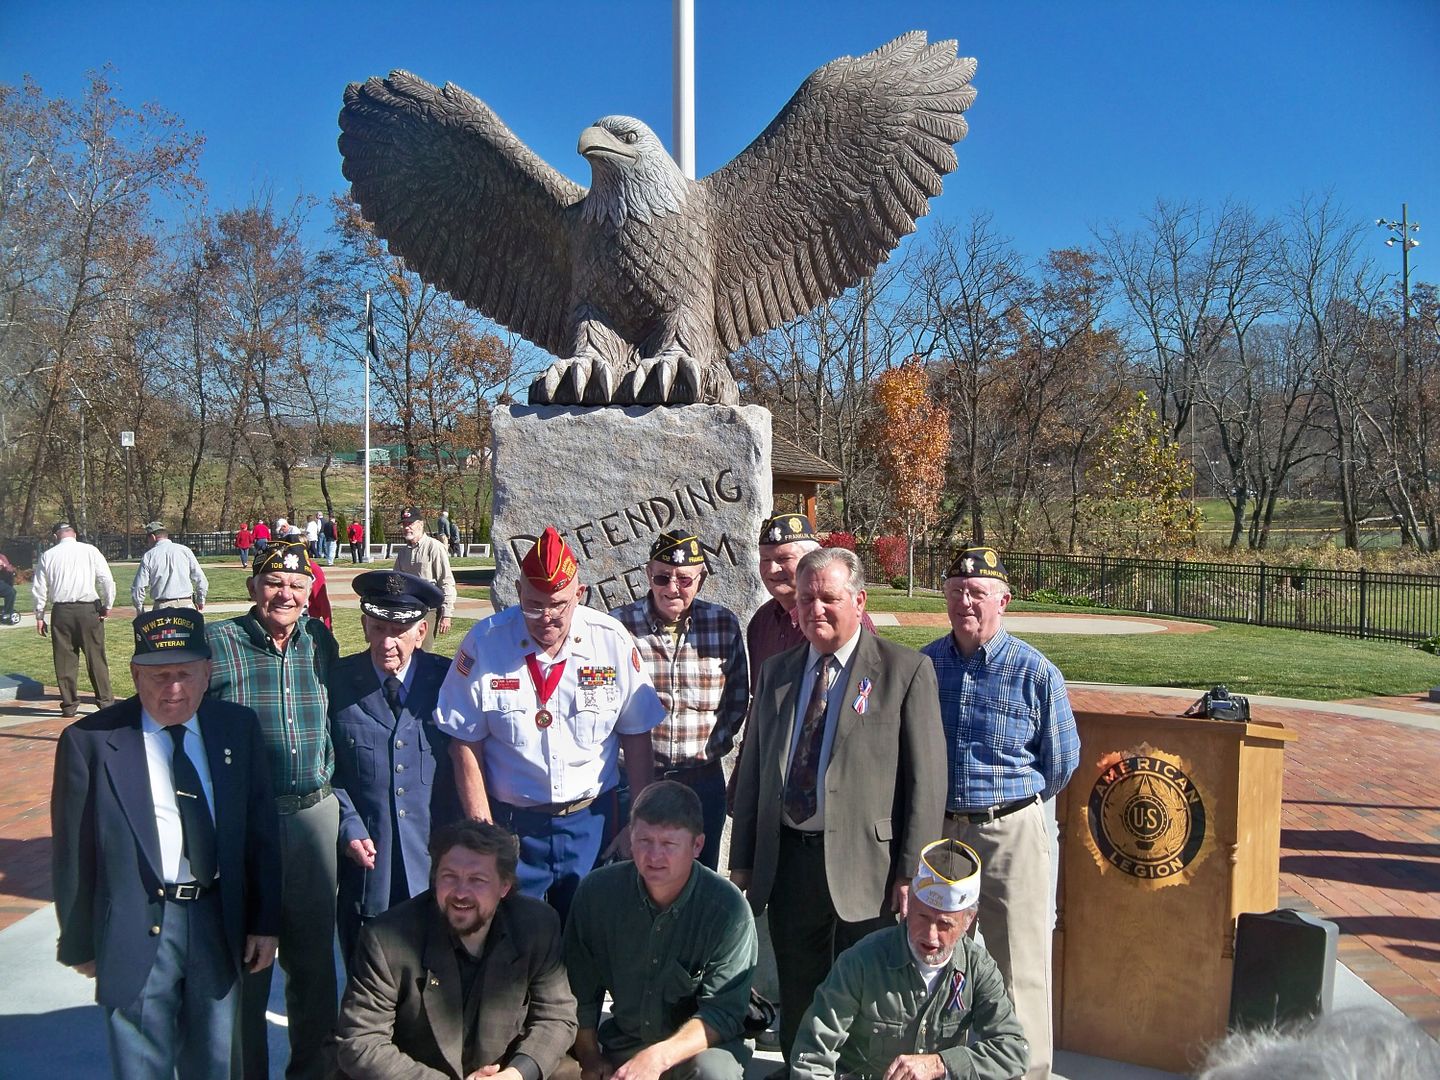 Alexei Kazantsev (leftmost on 1st row) poses with his sculpture and the Veterans Memorial Committee at the Macon County Veterans Memorial Park on November 11, 2010 
Photo by Bobby Coggins